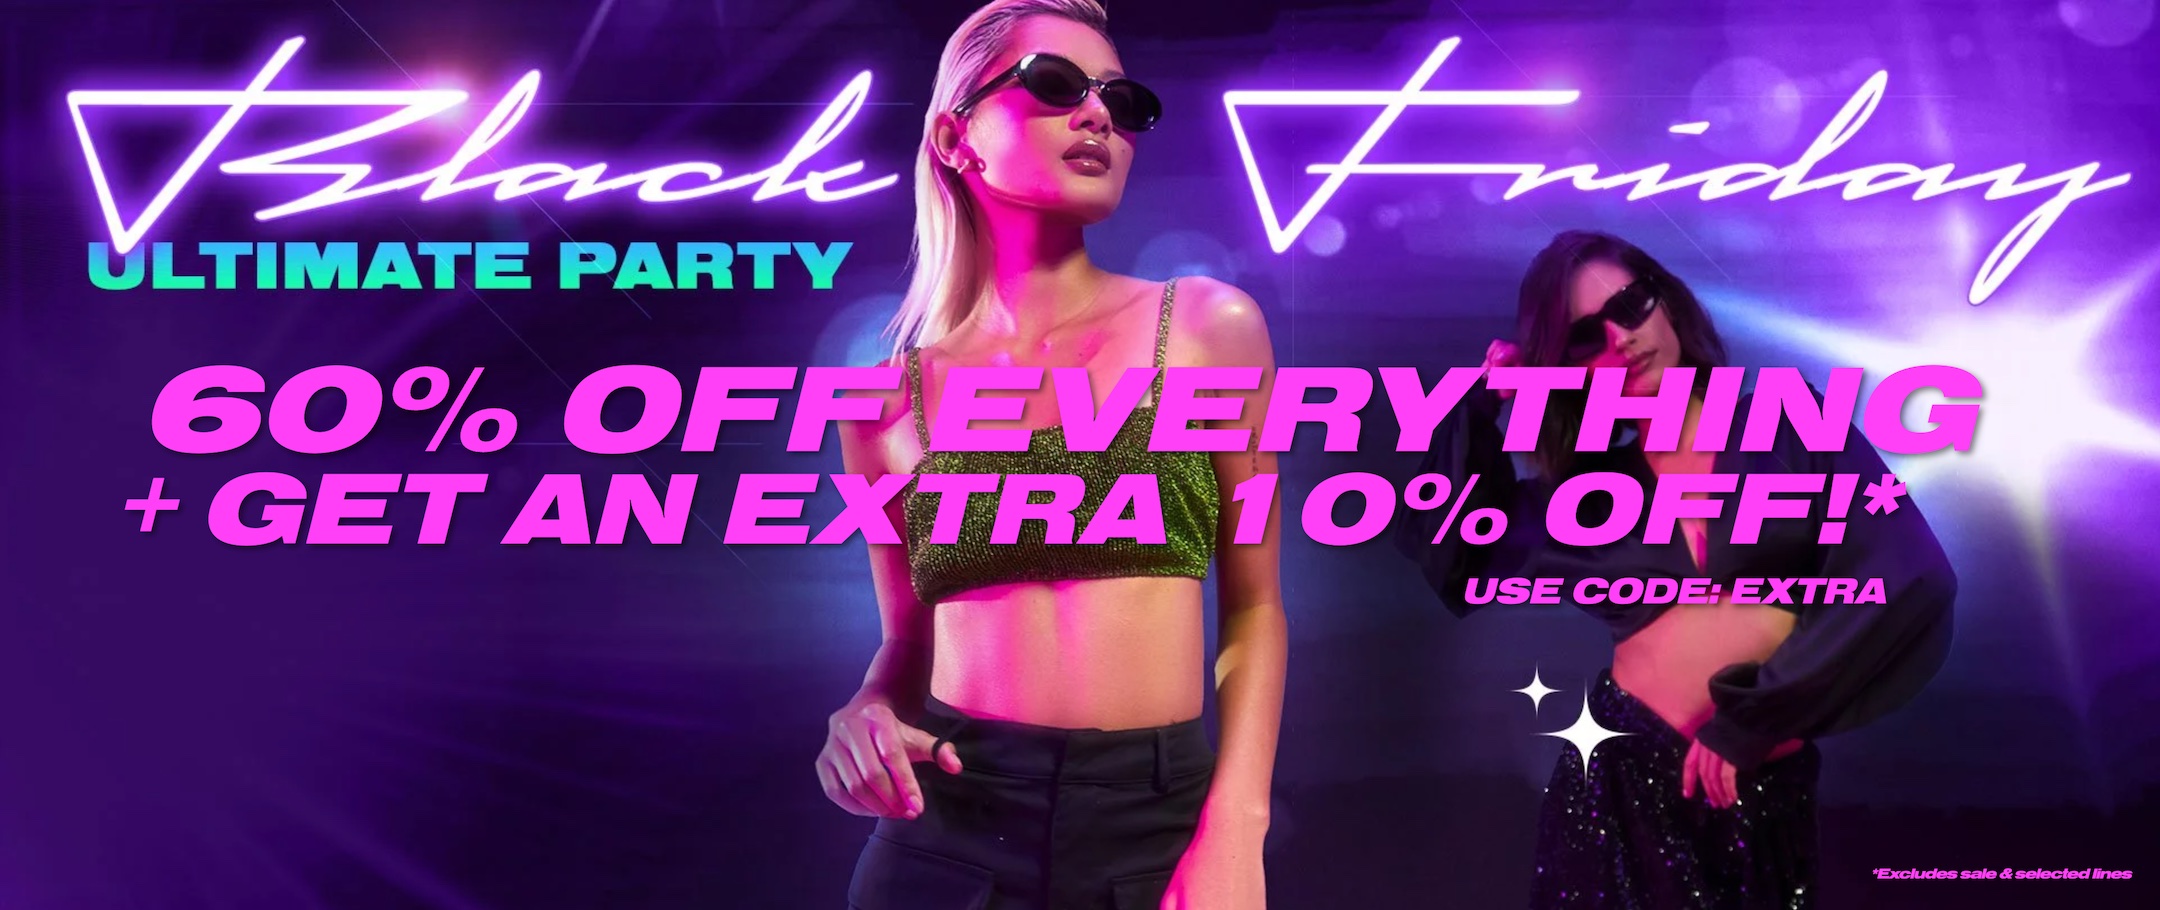 Boohoo: 60% Off Everything + Extra 10% Off Code